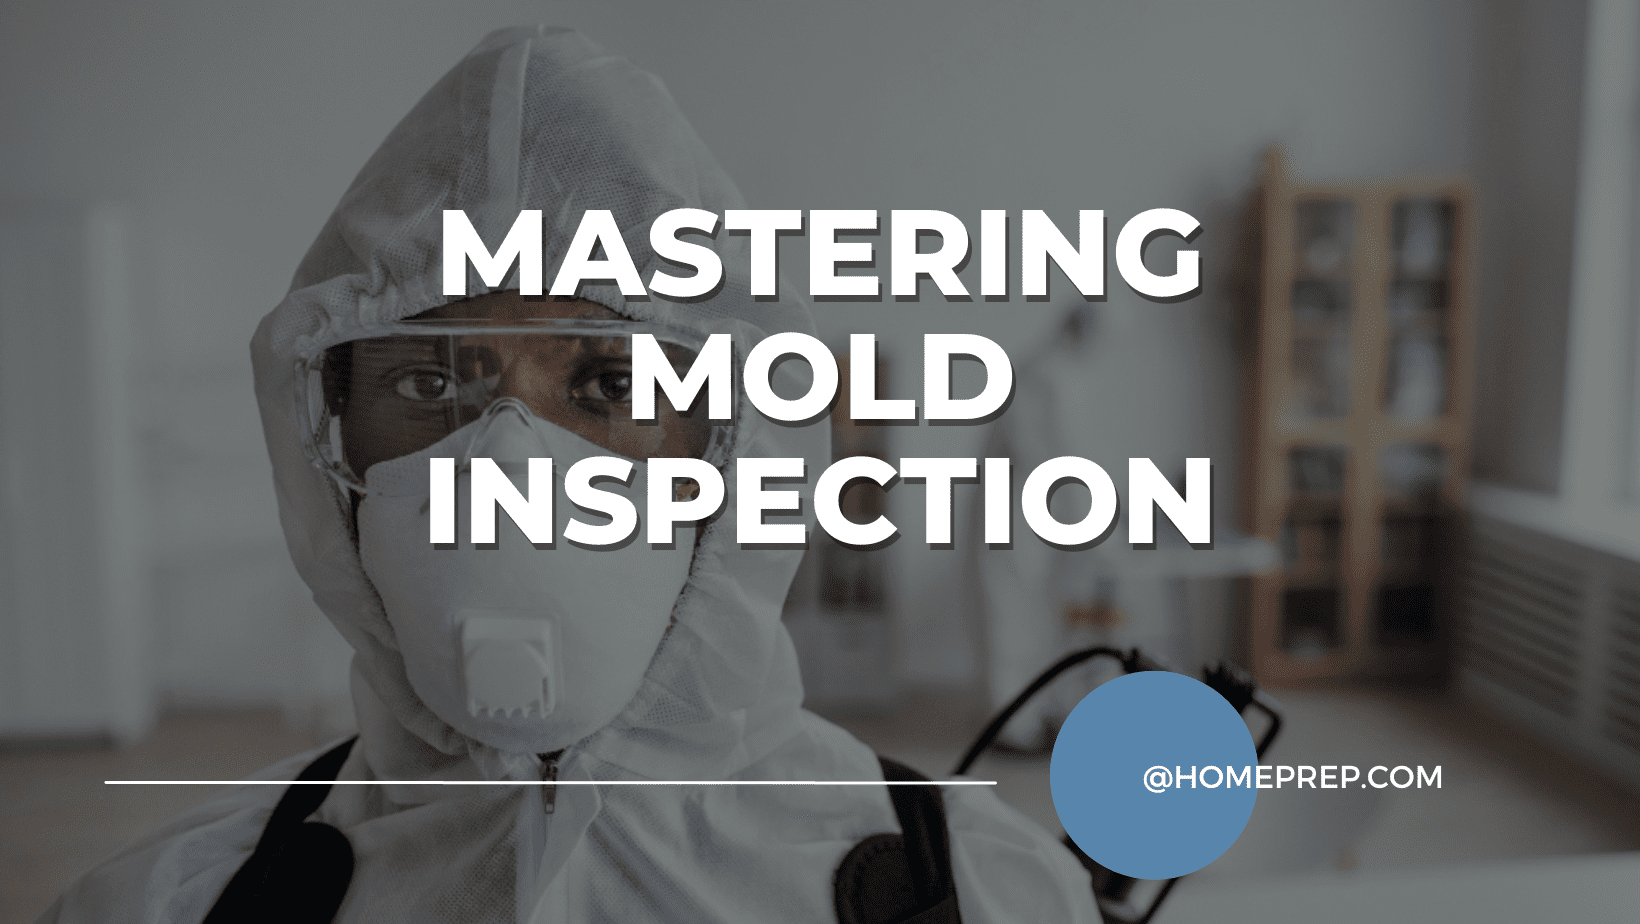 Mastering Mold Inspection: @HomePrep’s Certification Courses